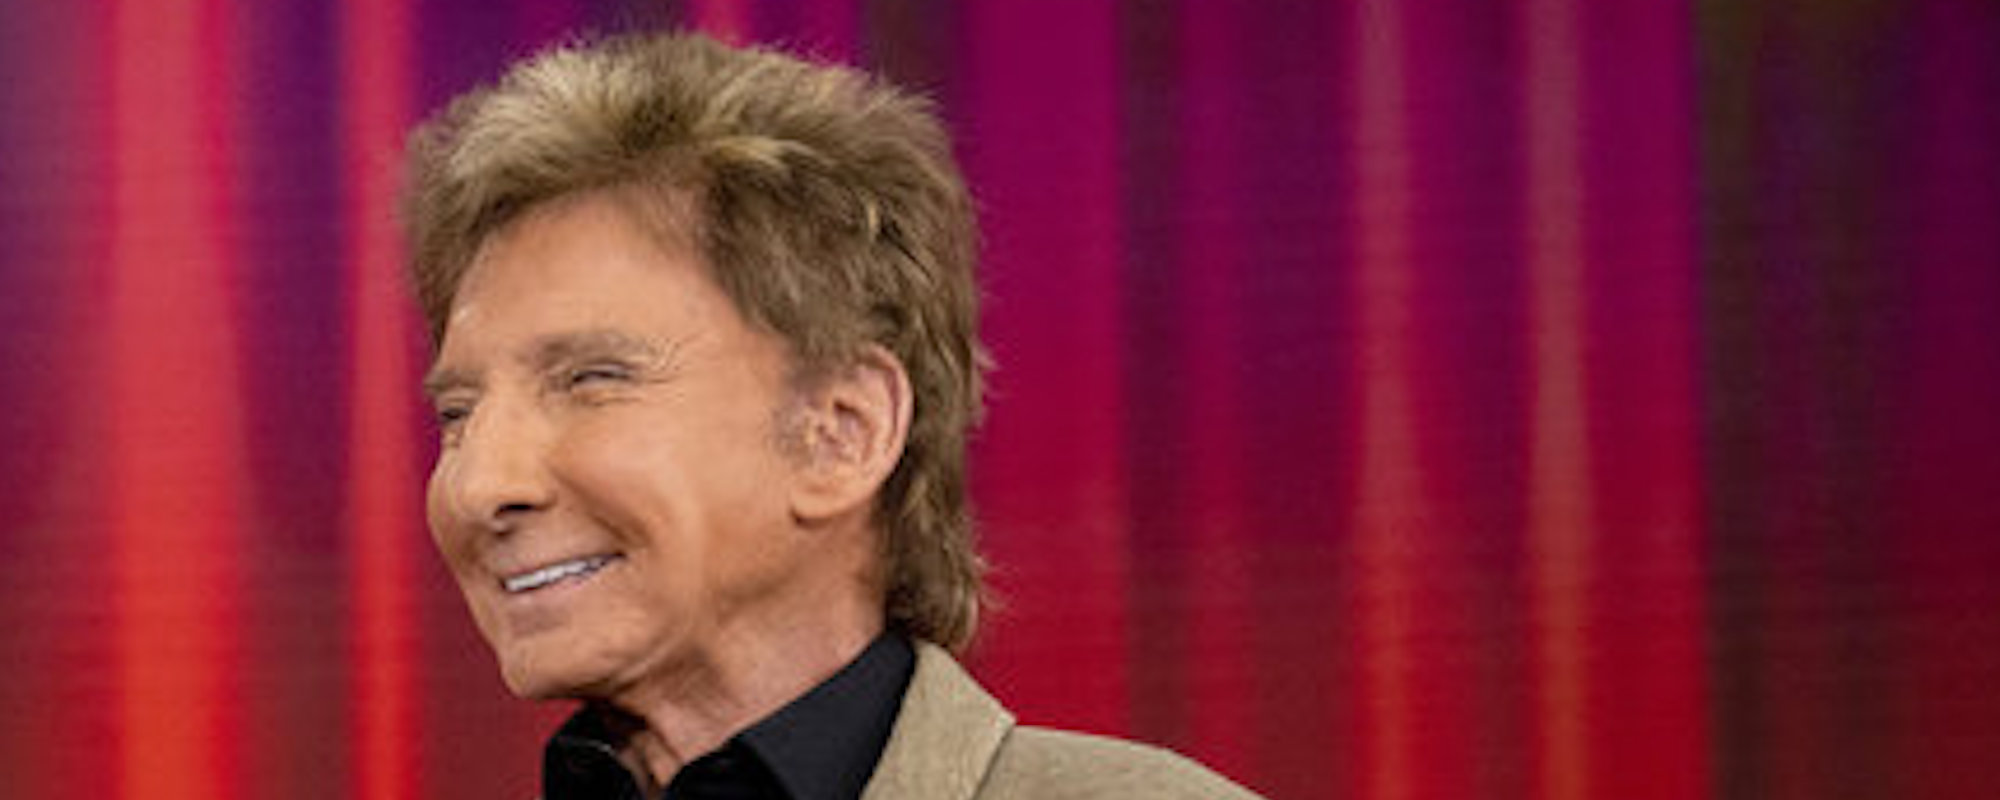 Barry Manilow Set to Star in Televised Christmas Special